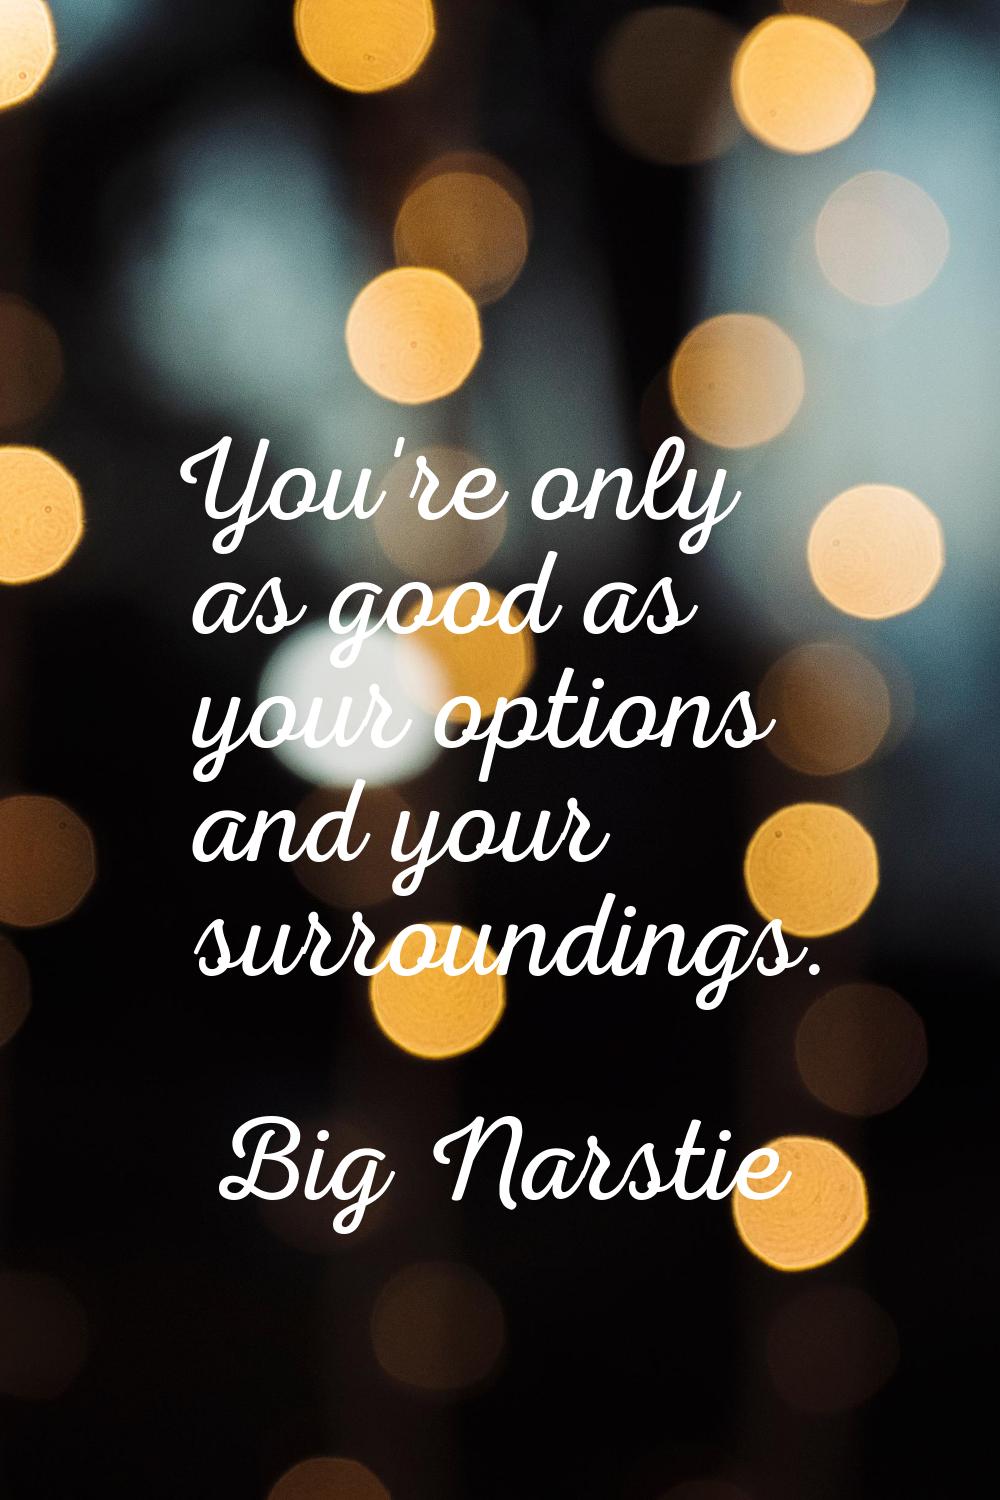 You're only as good as your options and your surroundings.